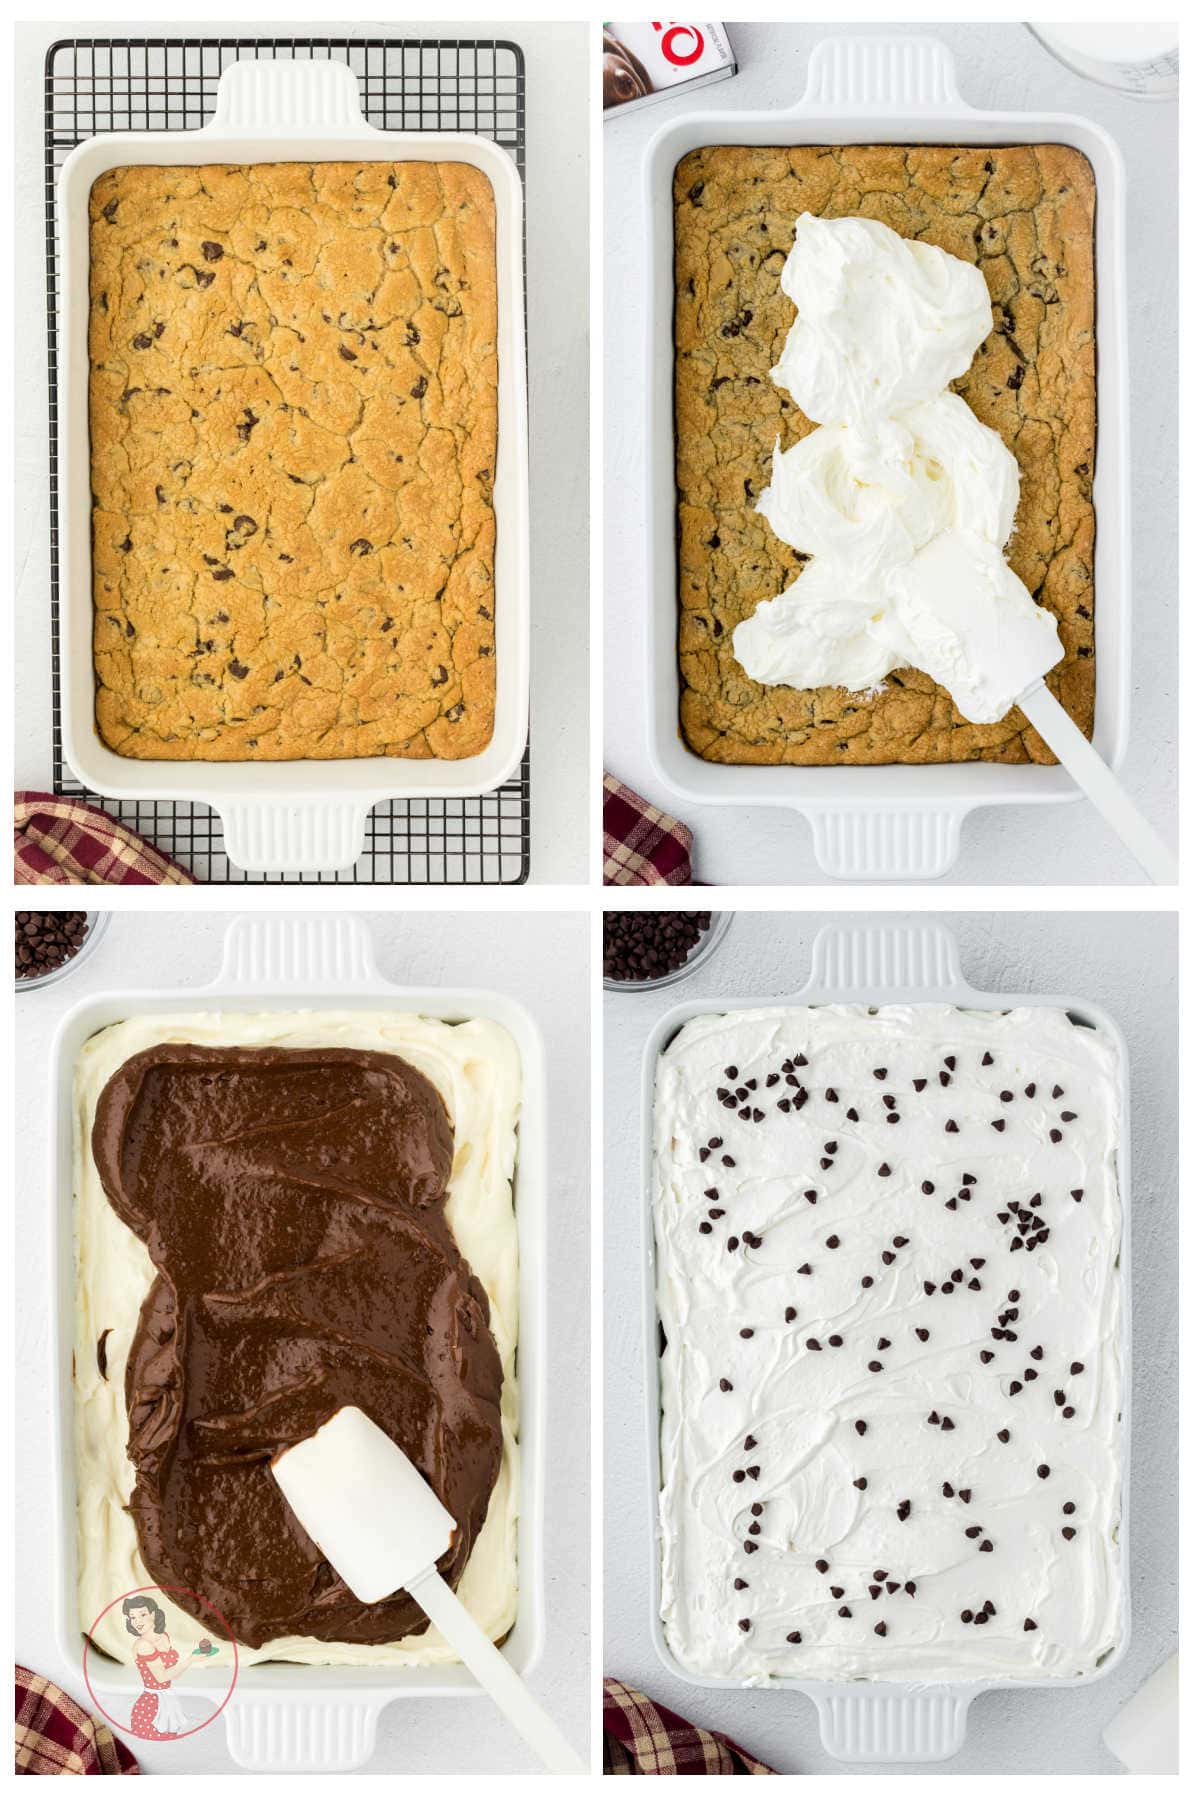 Collage of images showing how to make this dessert.